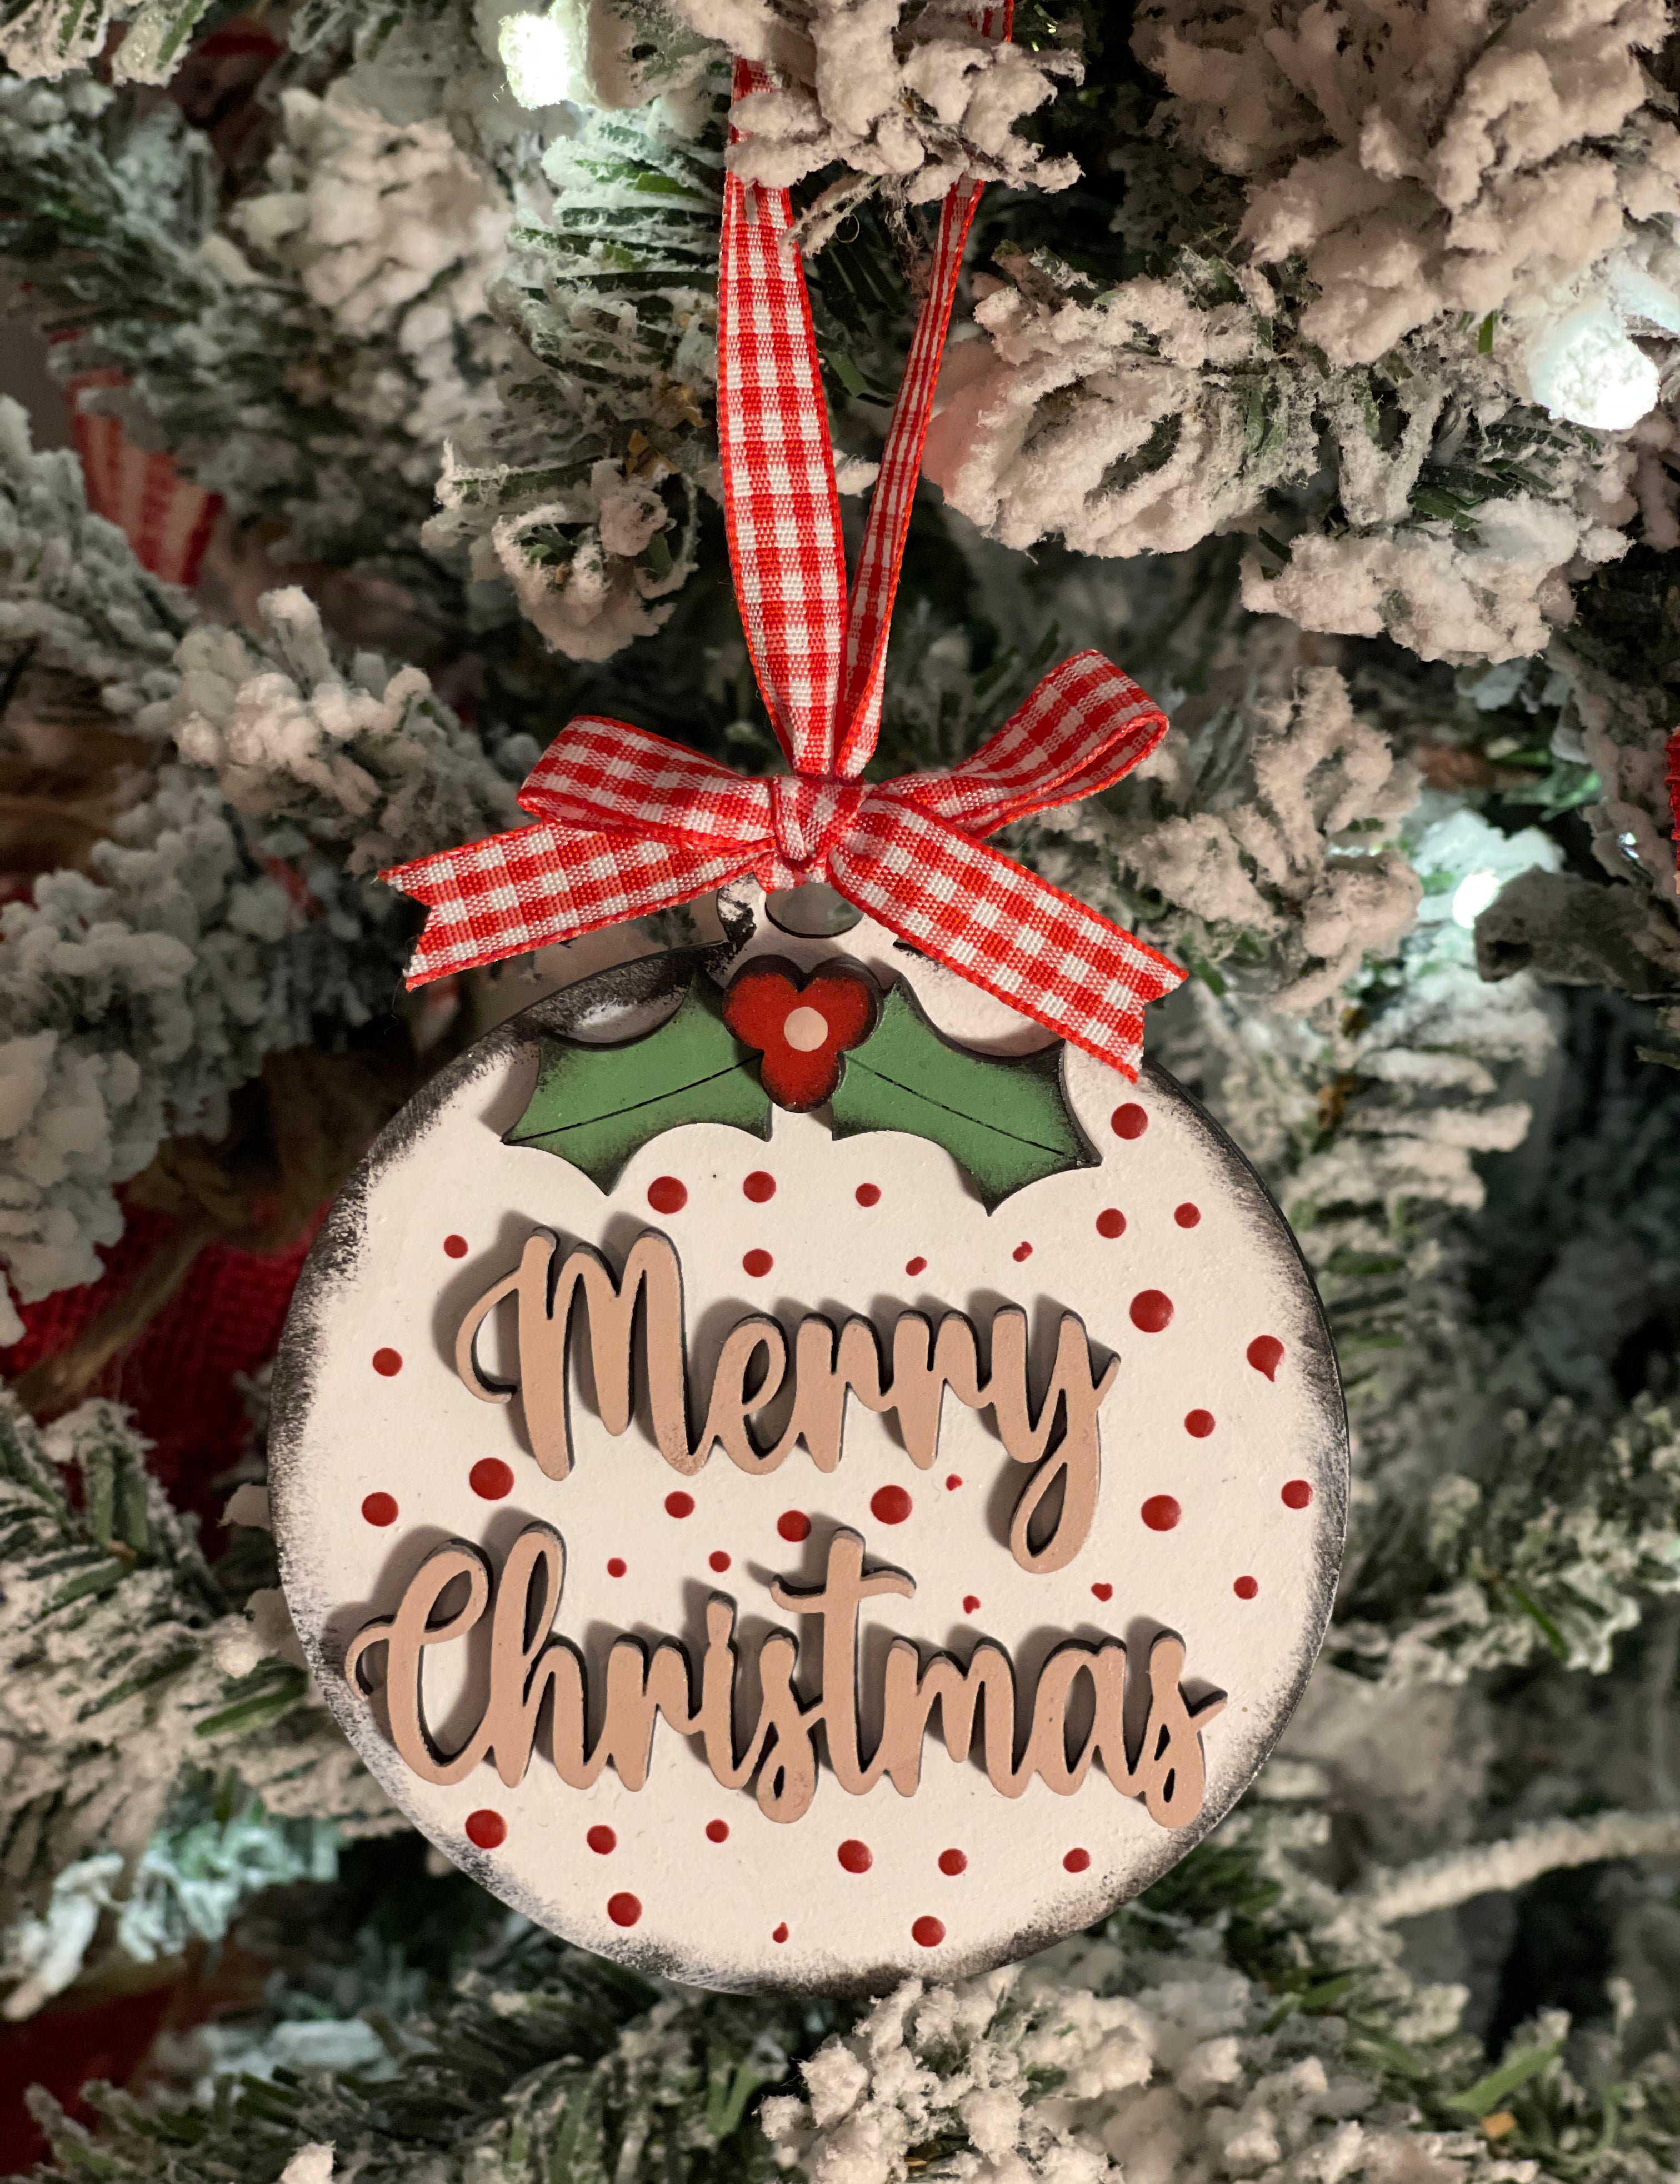 Merry Christmas ornament is displayed hanging on a tree.